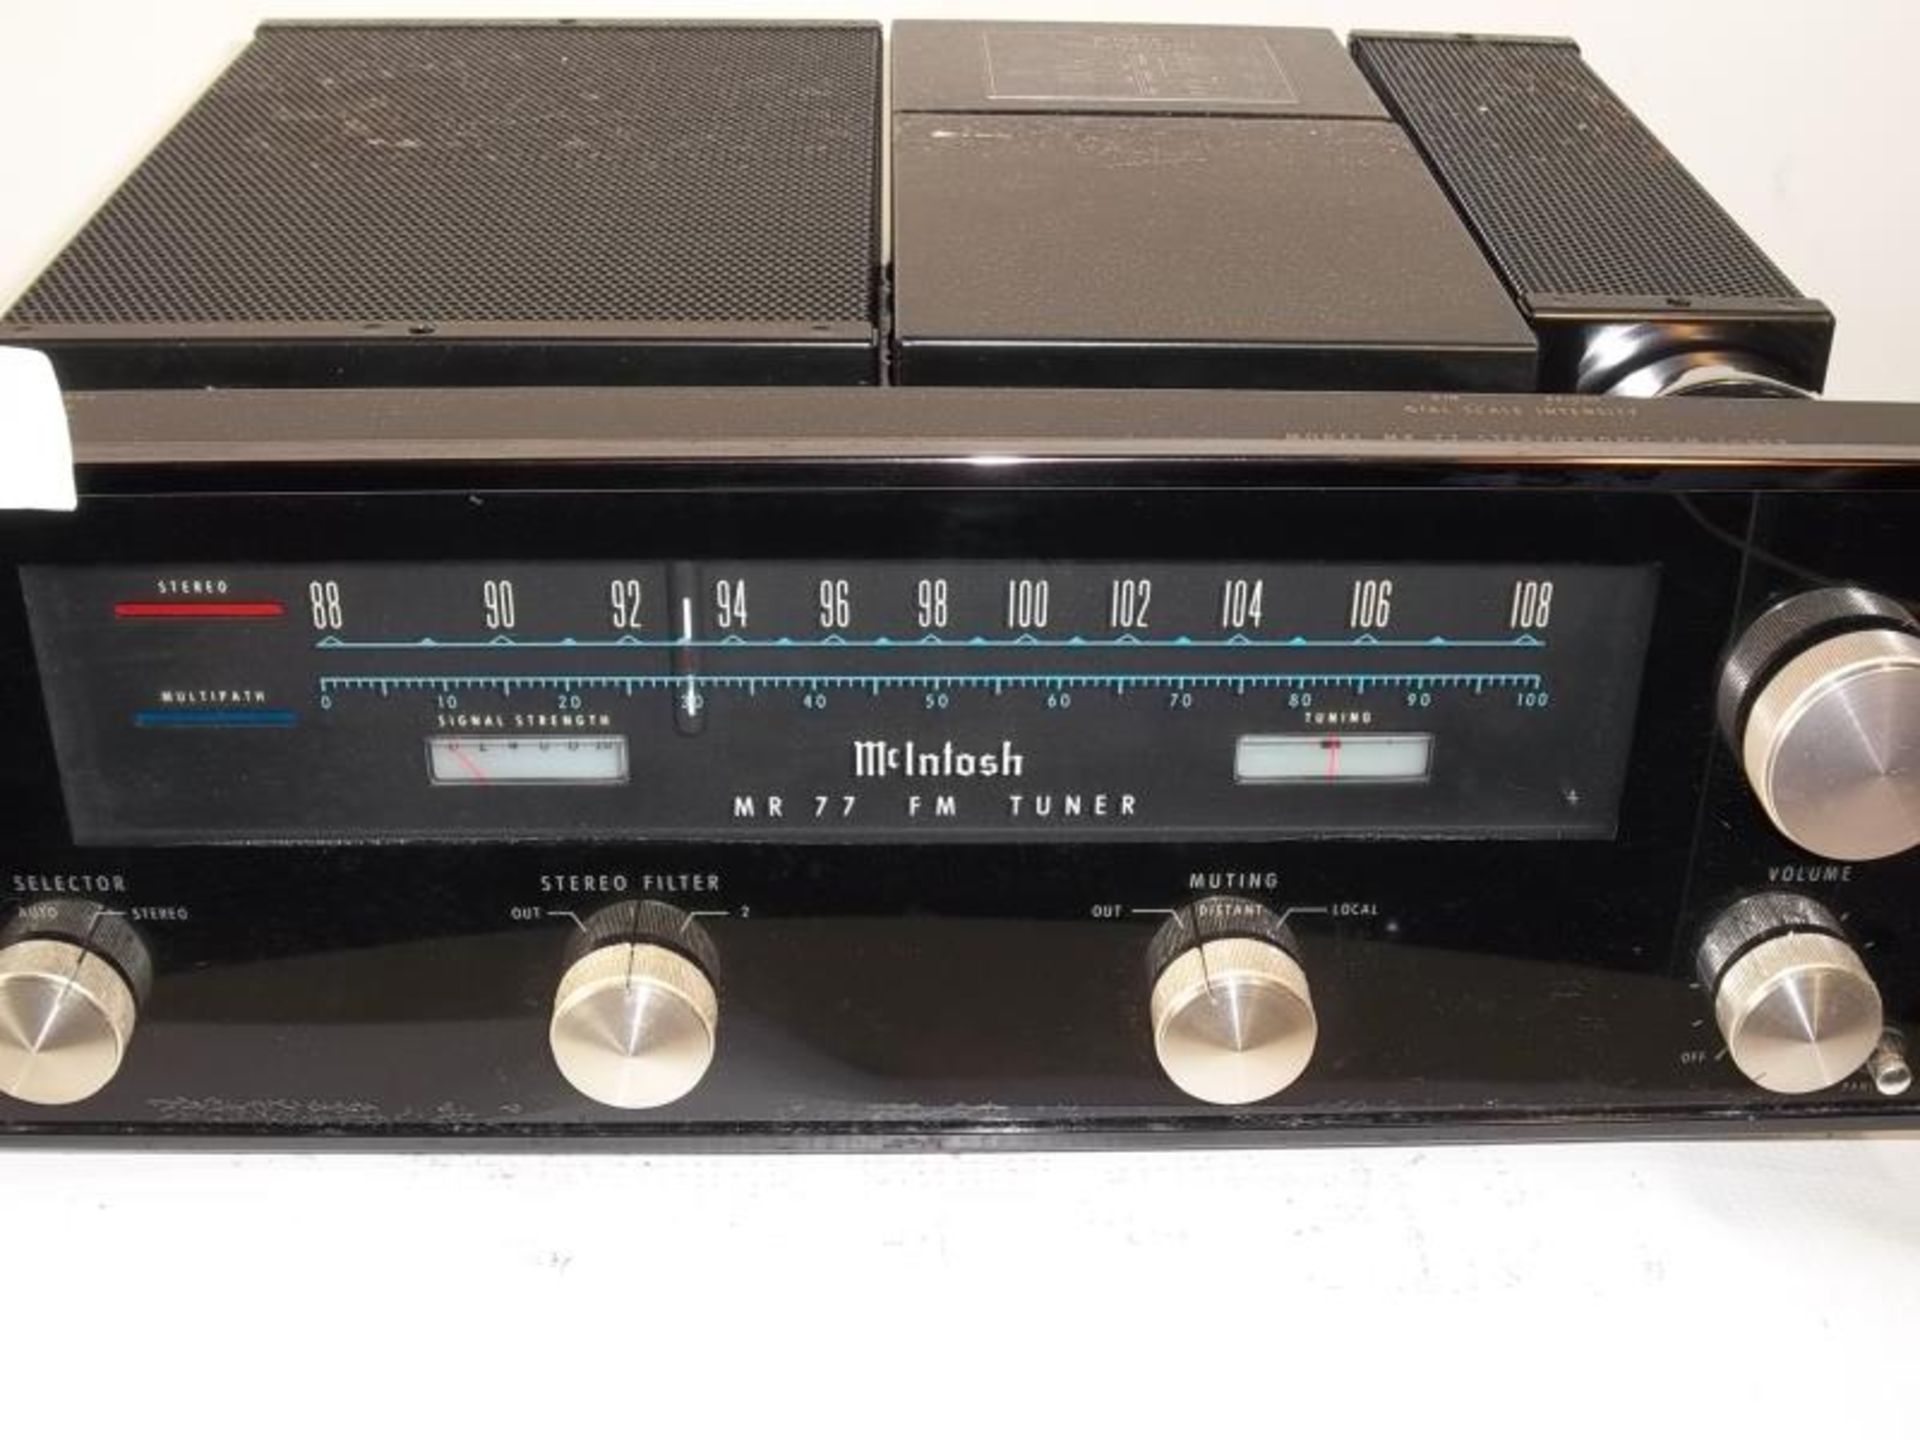 McIntosh MR 77, Digital FM Tuner, wood case, s # 42Y94, tested - powers up - Image 2 of 9